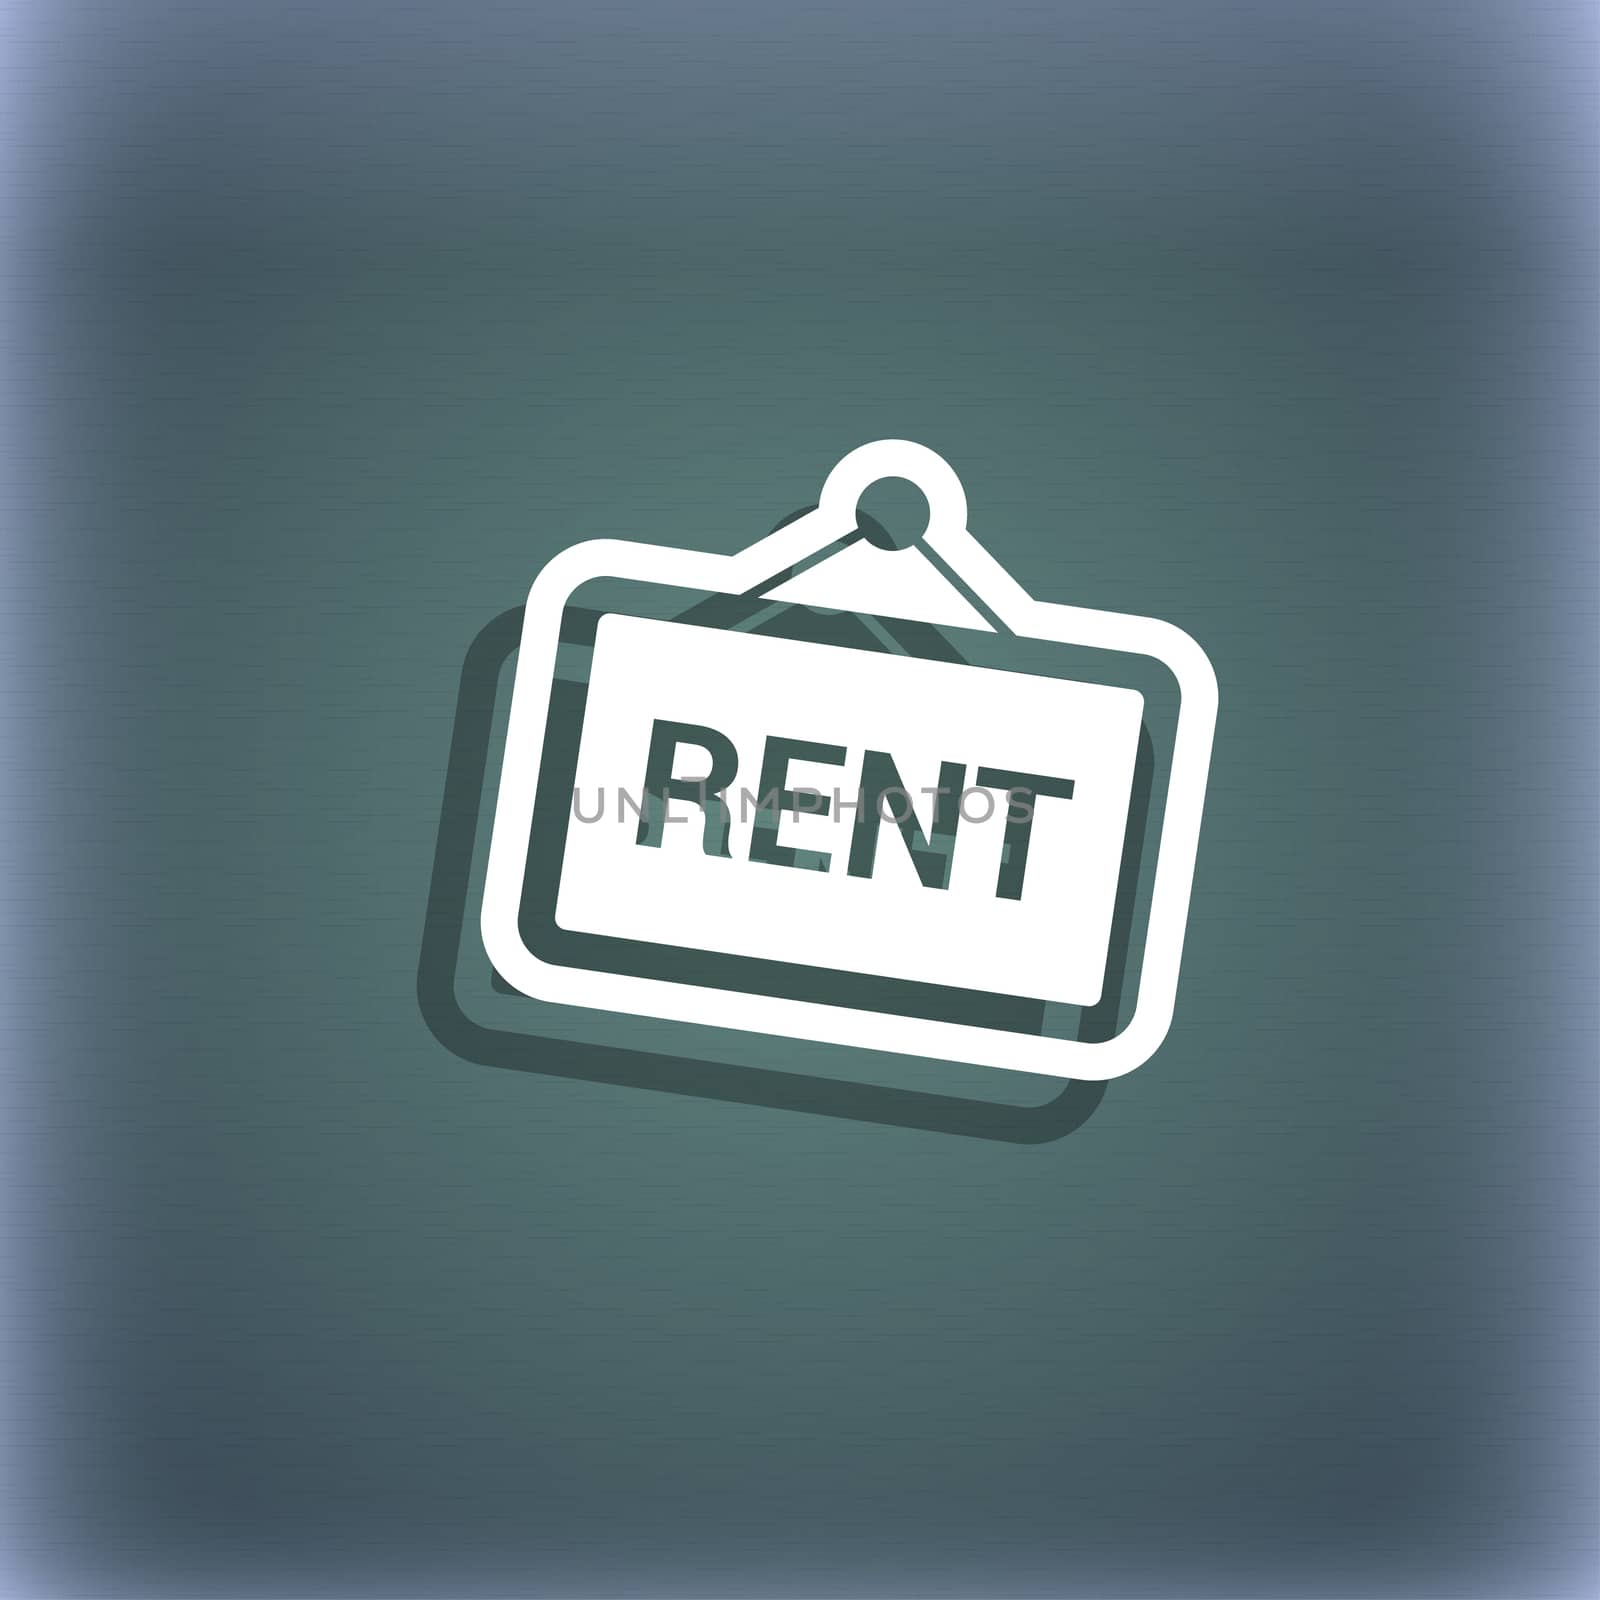 Rent icon symbol on the blue-green abstract background with shadow and space for your text. illustration